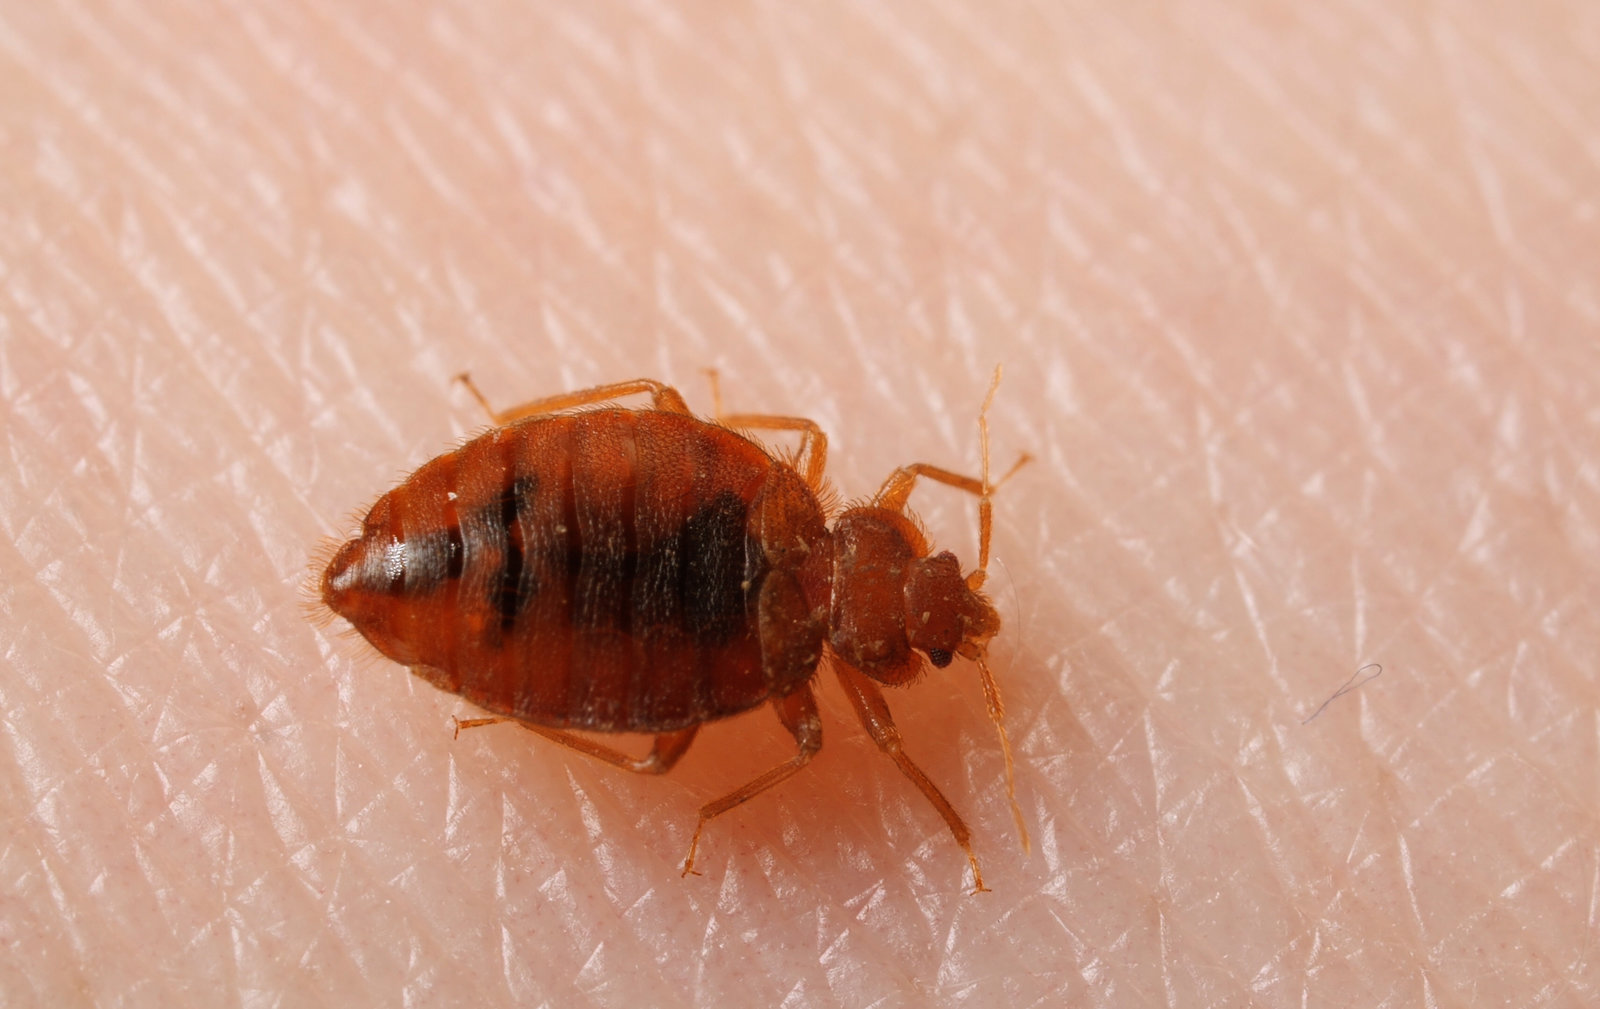 How Best To Snag And Destroy Bedbugs?